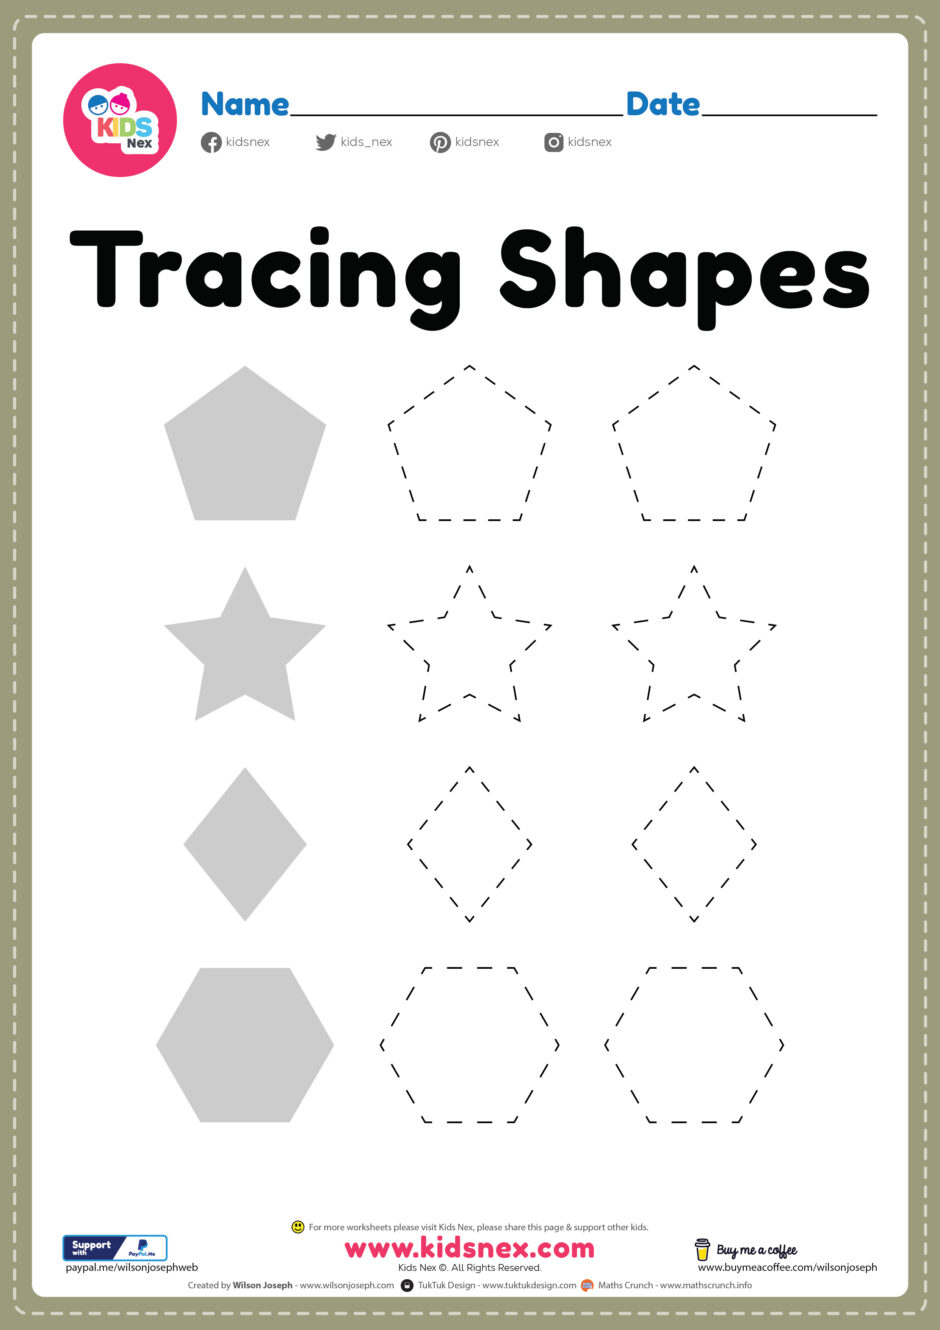 Worksheet for Tracing Shapes